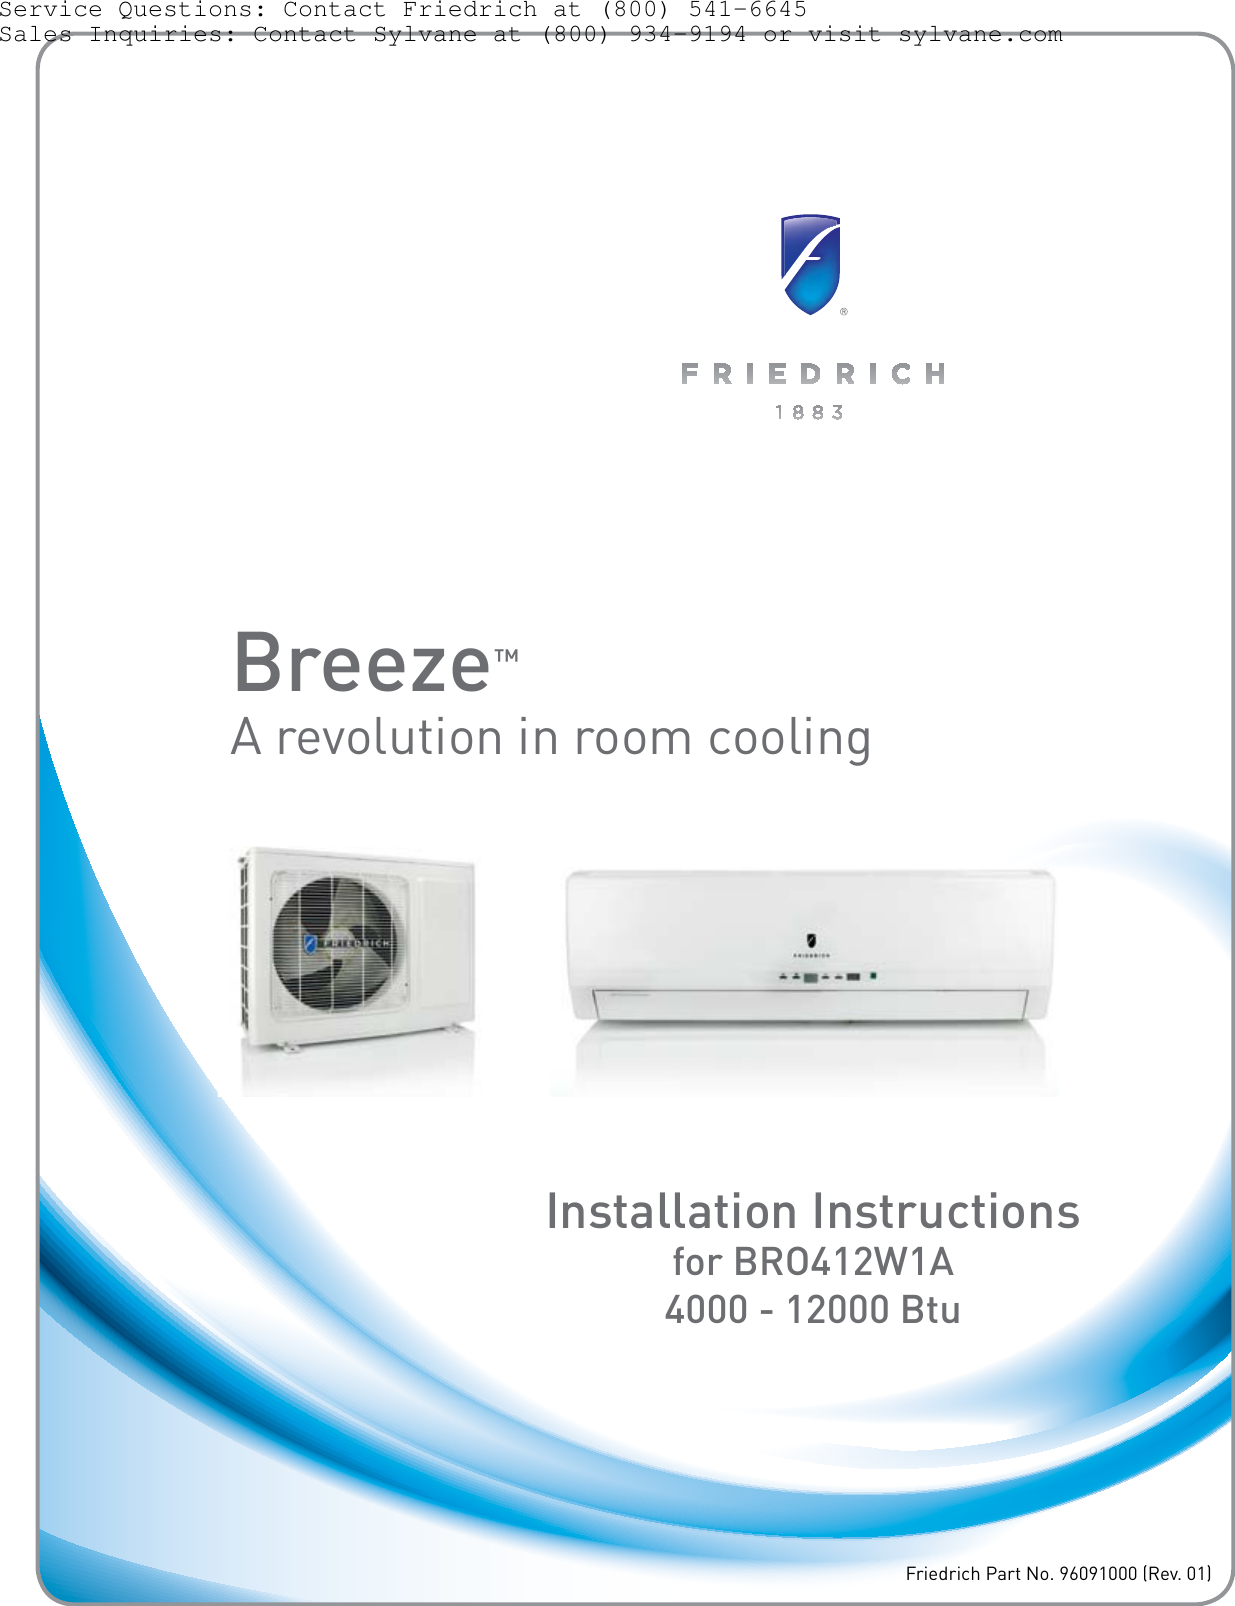 Page 1 of 8 - Friedrich Friedrich-Friedrich-Air-Conditioner-Bro412W1A-Users-Manual- Breeze BR0412W1A Owner's Manual | Sylvane  Friedrich-friedrich-air-conditioner-bro412w1a-users-manual